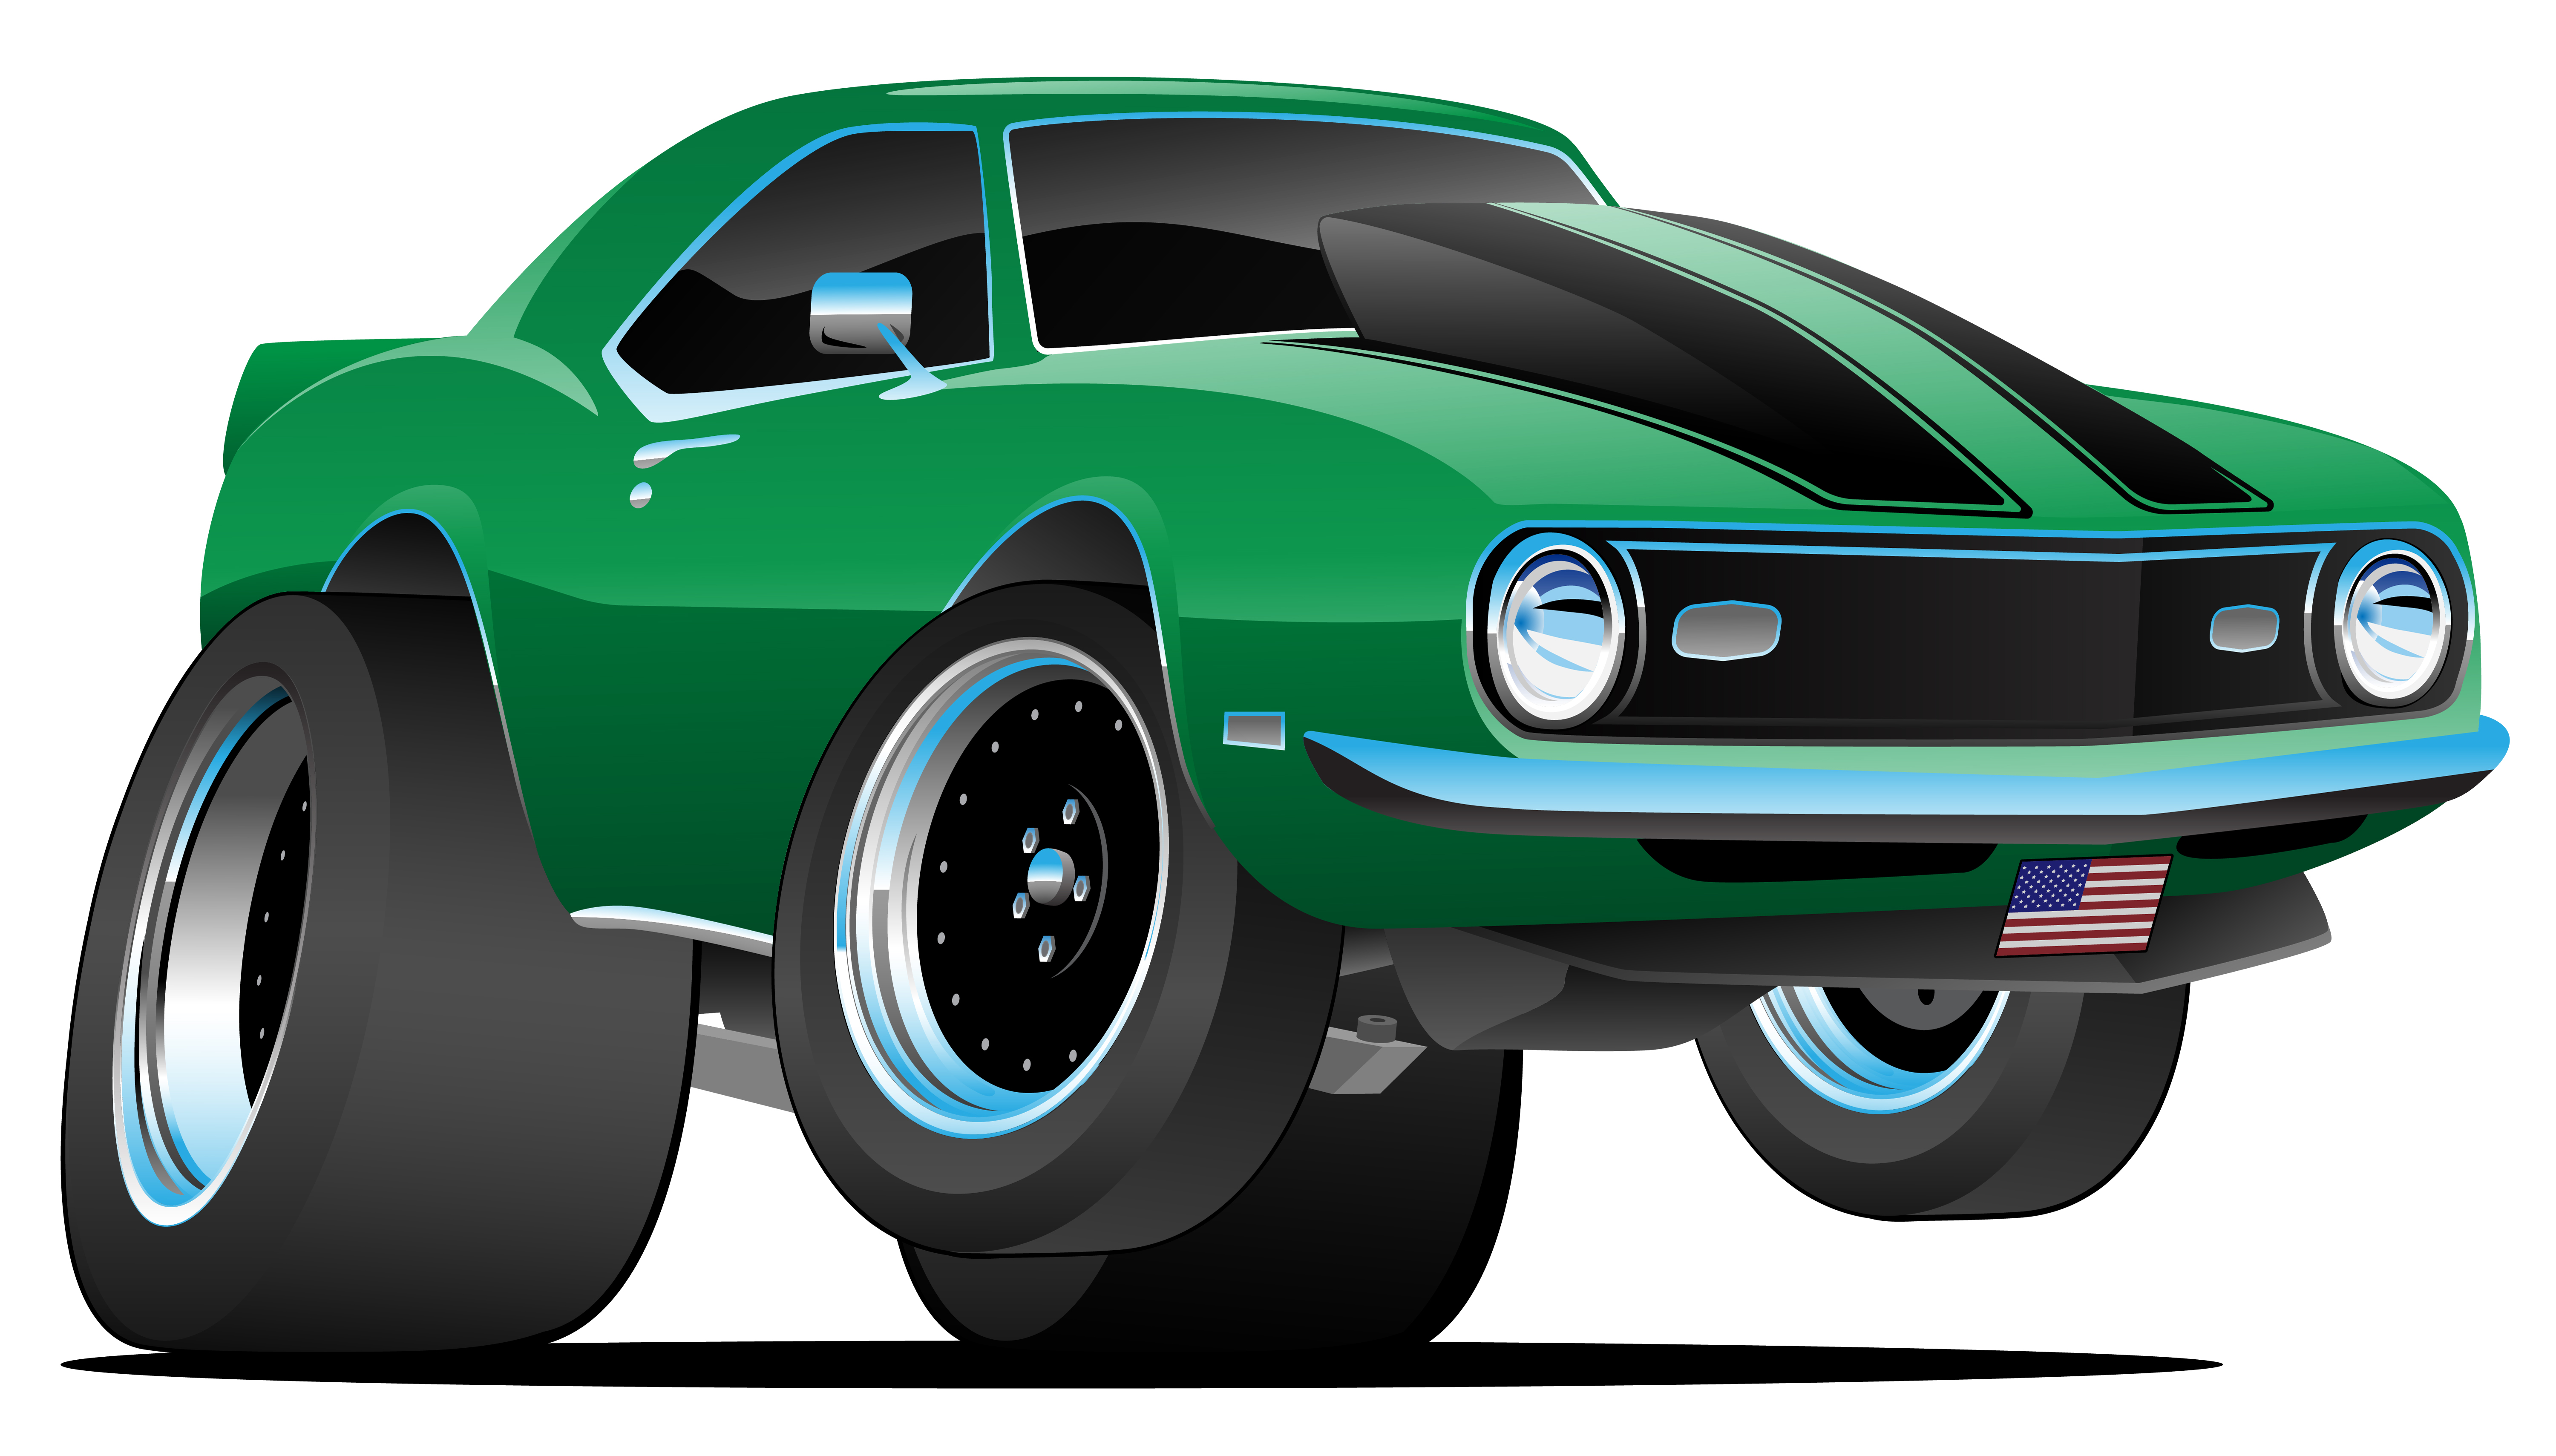 Classic Sixties Style American Muscle Car Cartoon Vector